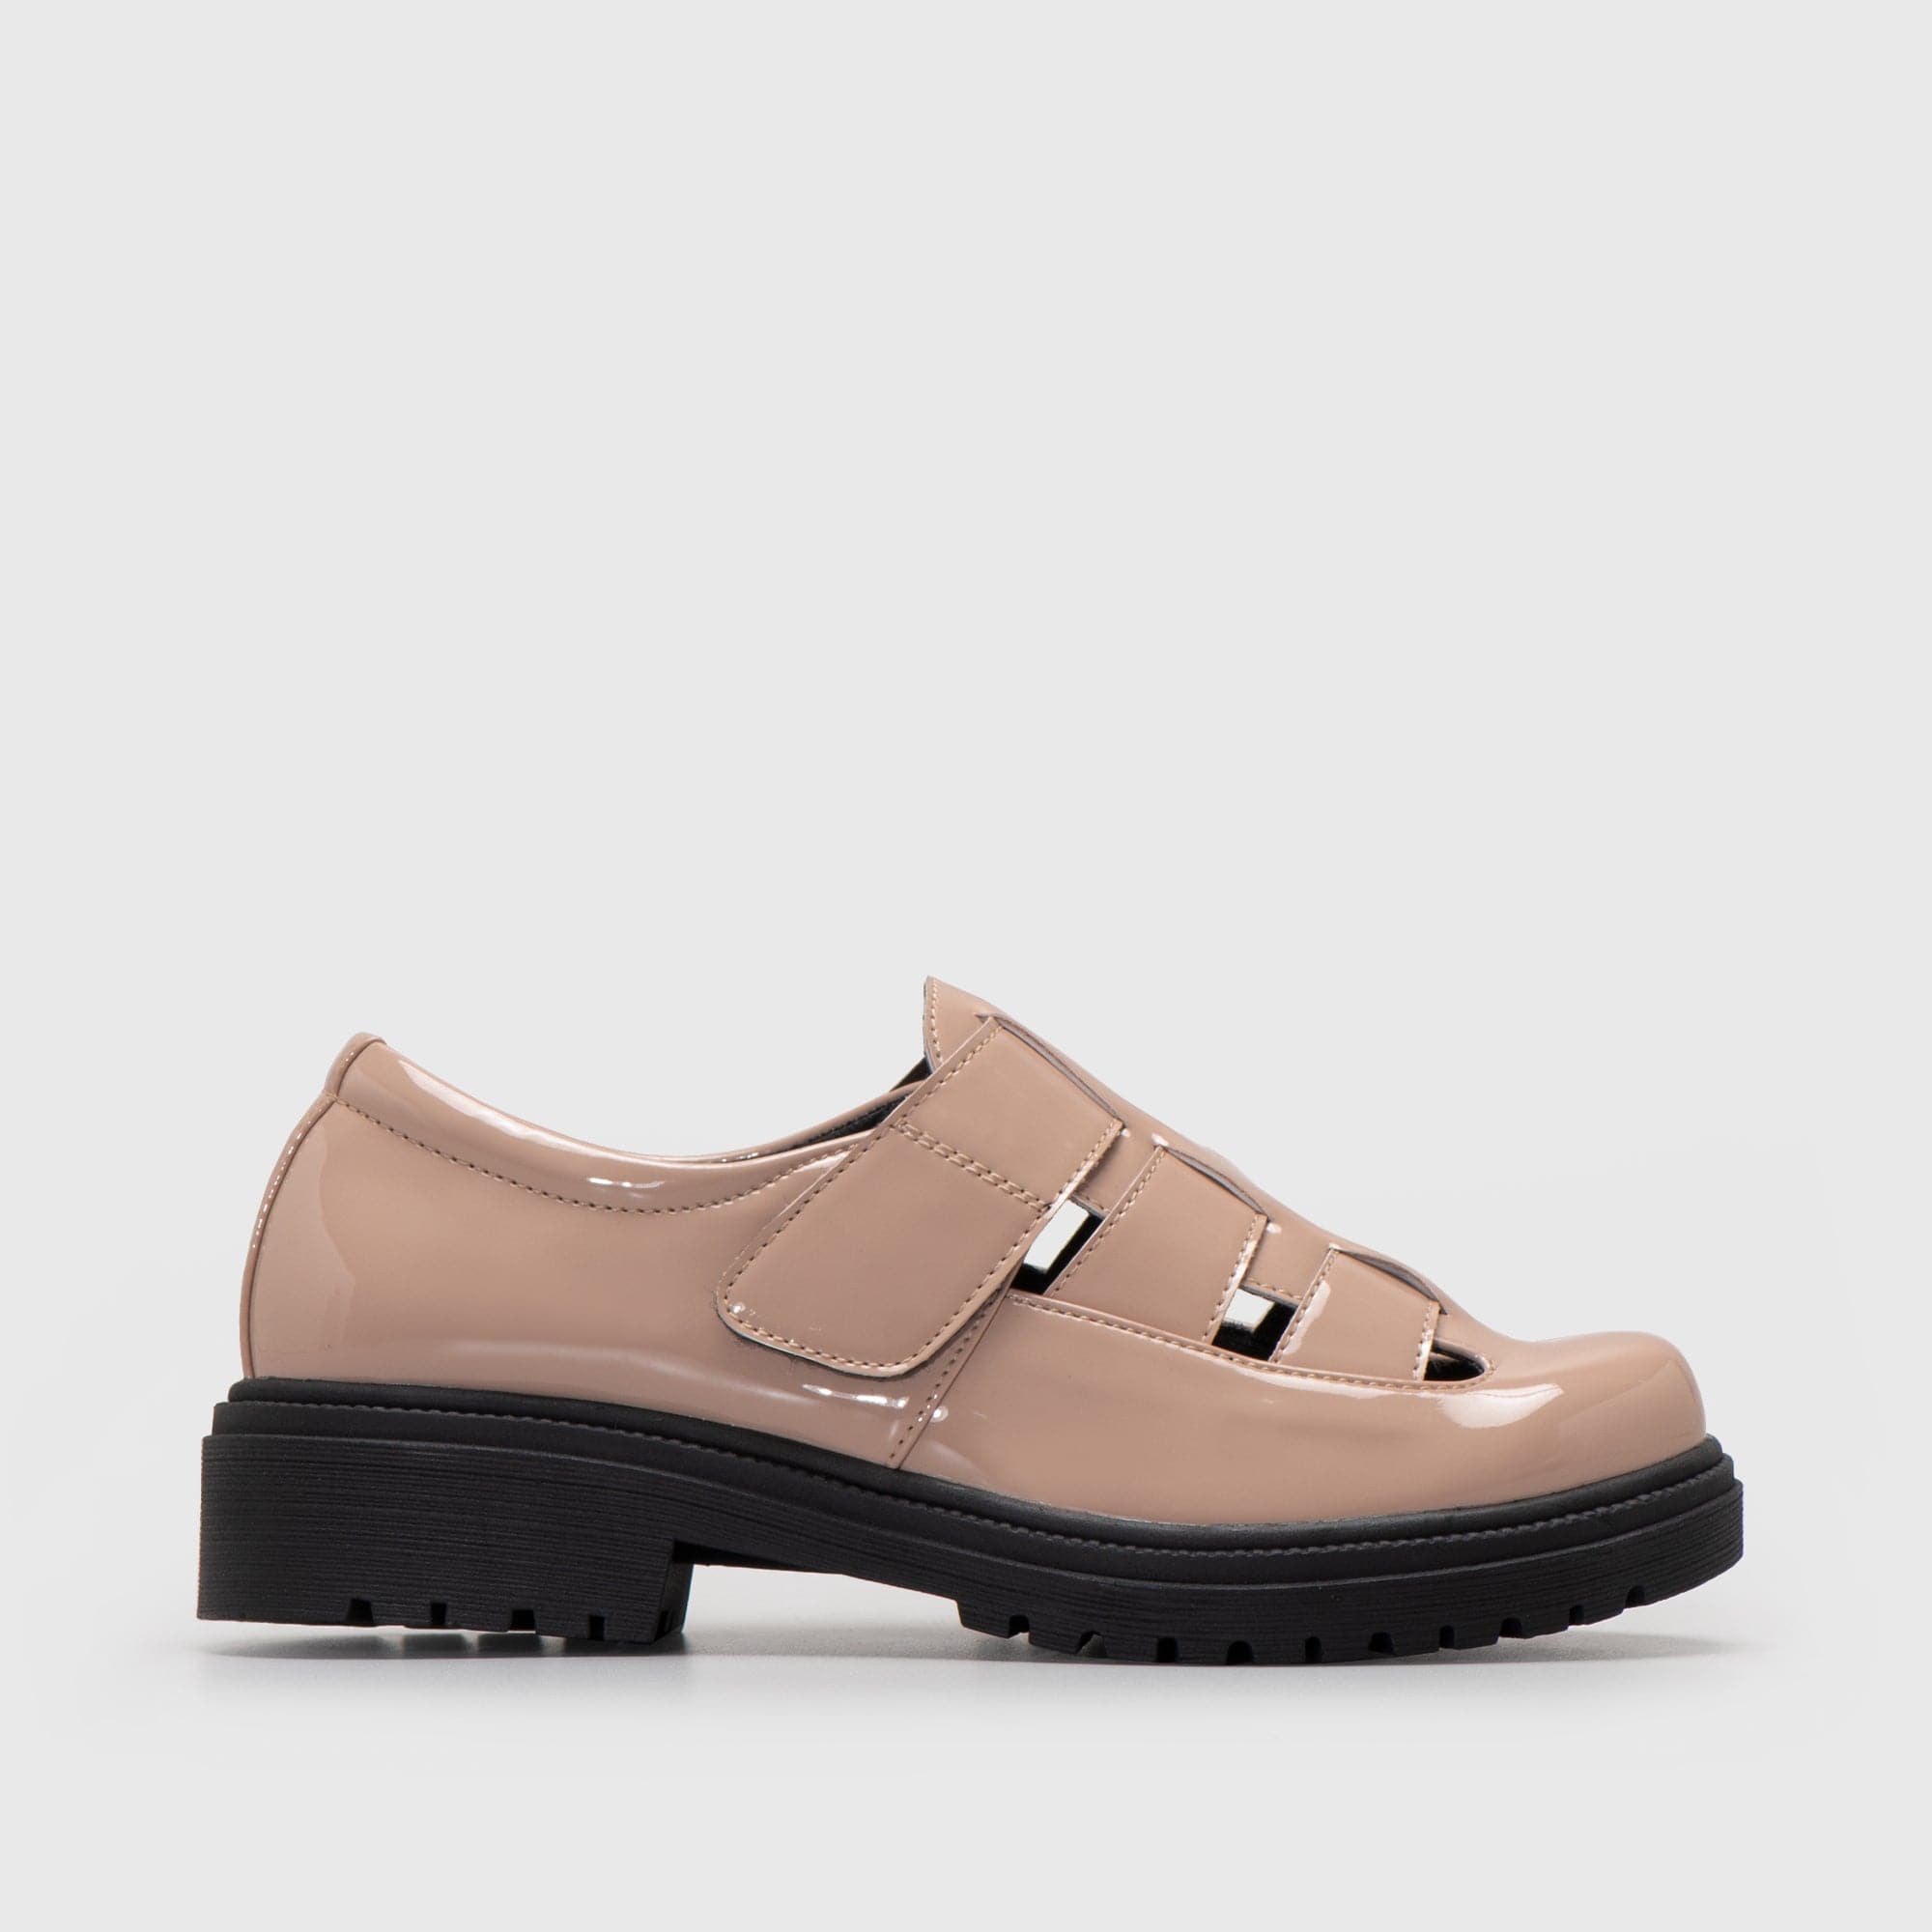 Adorable Projects Official Oxford Dasa Oxford Nude